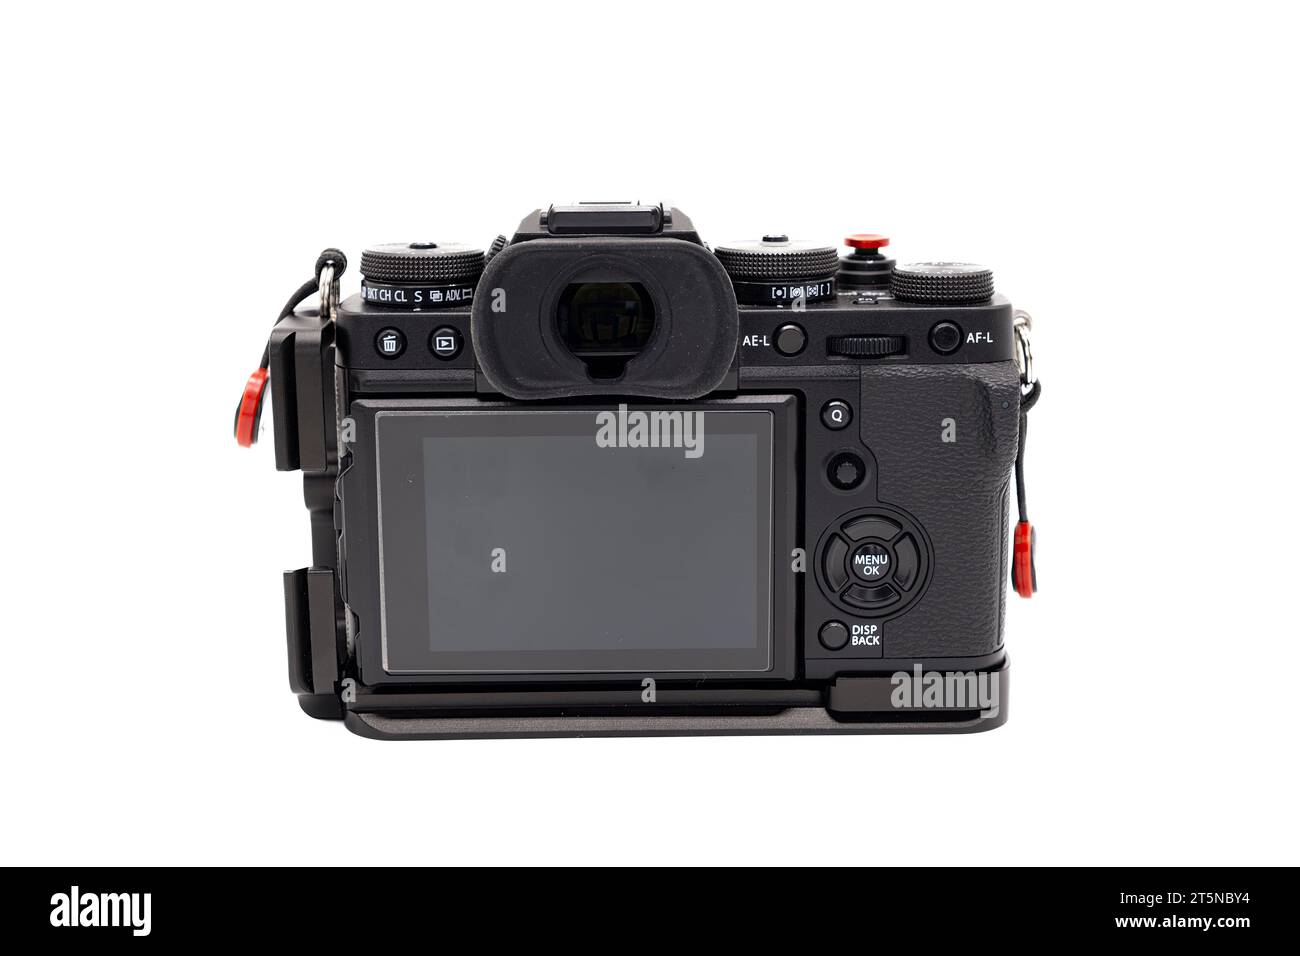 Irvine, Scotland, UK - October  26, 2023: Fujifilm branded X-T3 Camera is now Equipped with a new 26-megapixel APS-C sensor and is shown here with a n Stock Photo